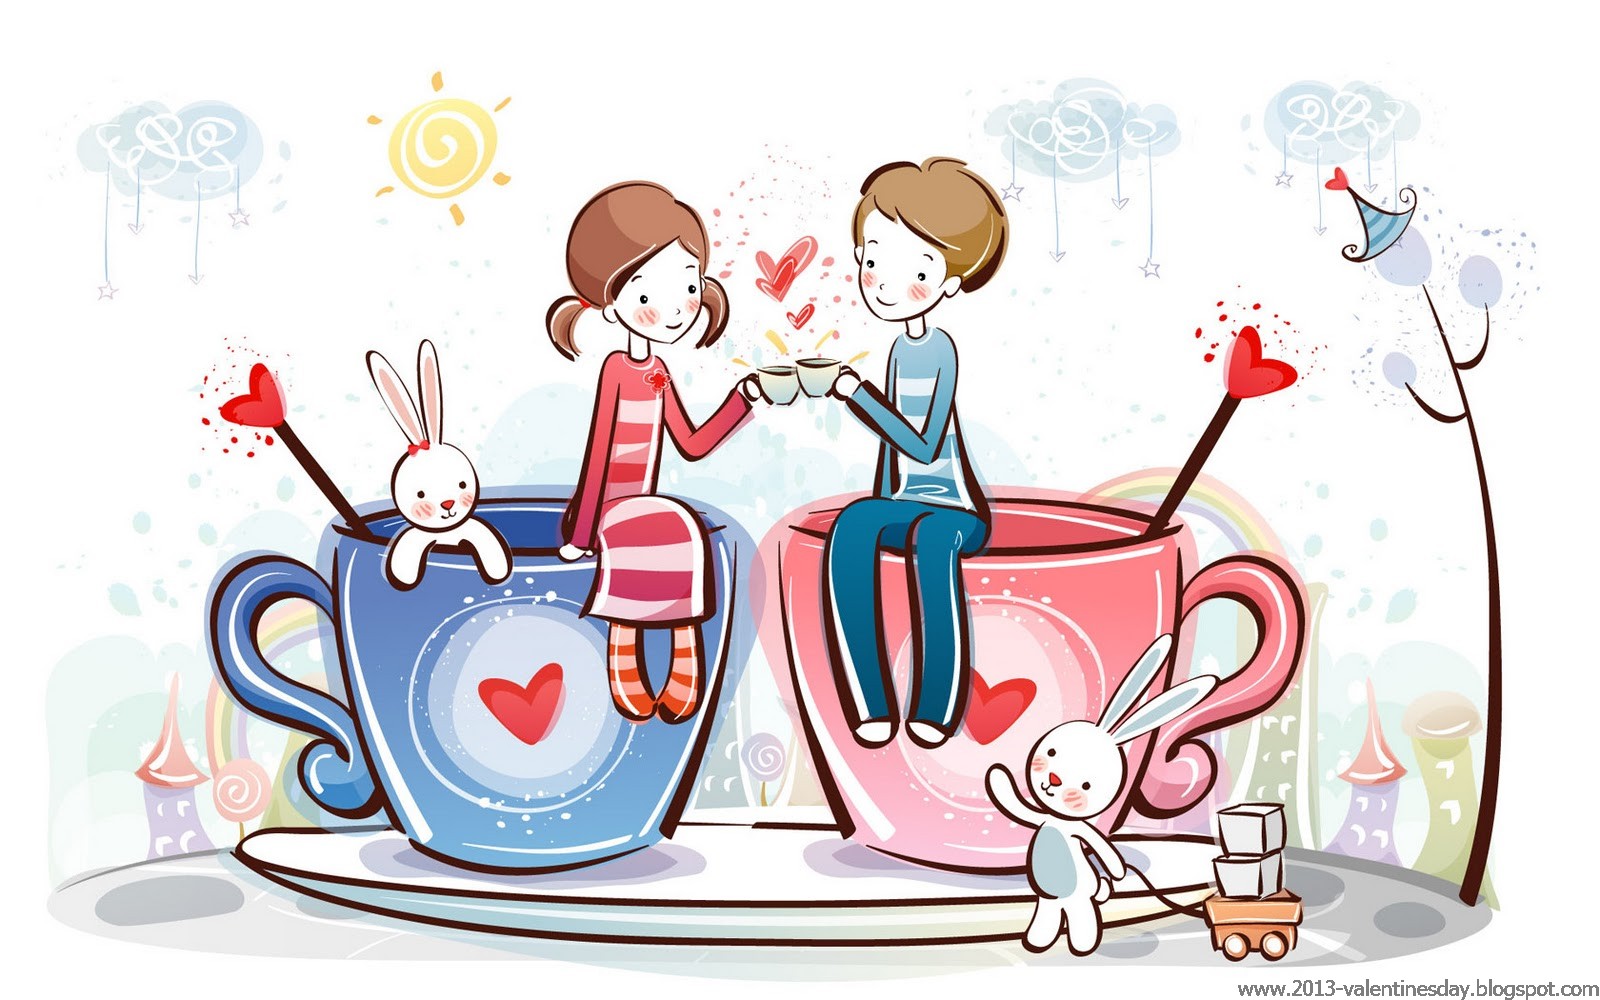 Valentines day Clip Art Collection 2013 | I Love You-Picture And Quotes1600 x 1000